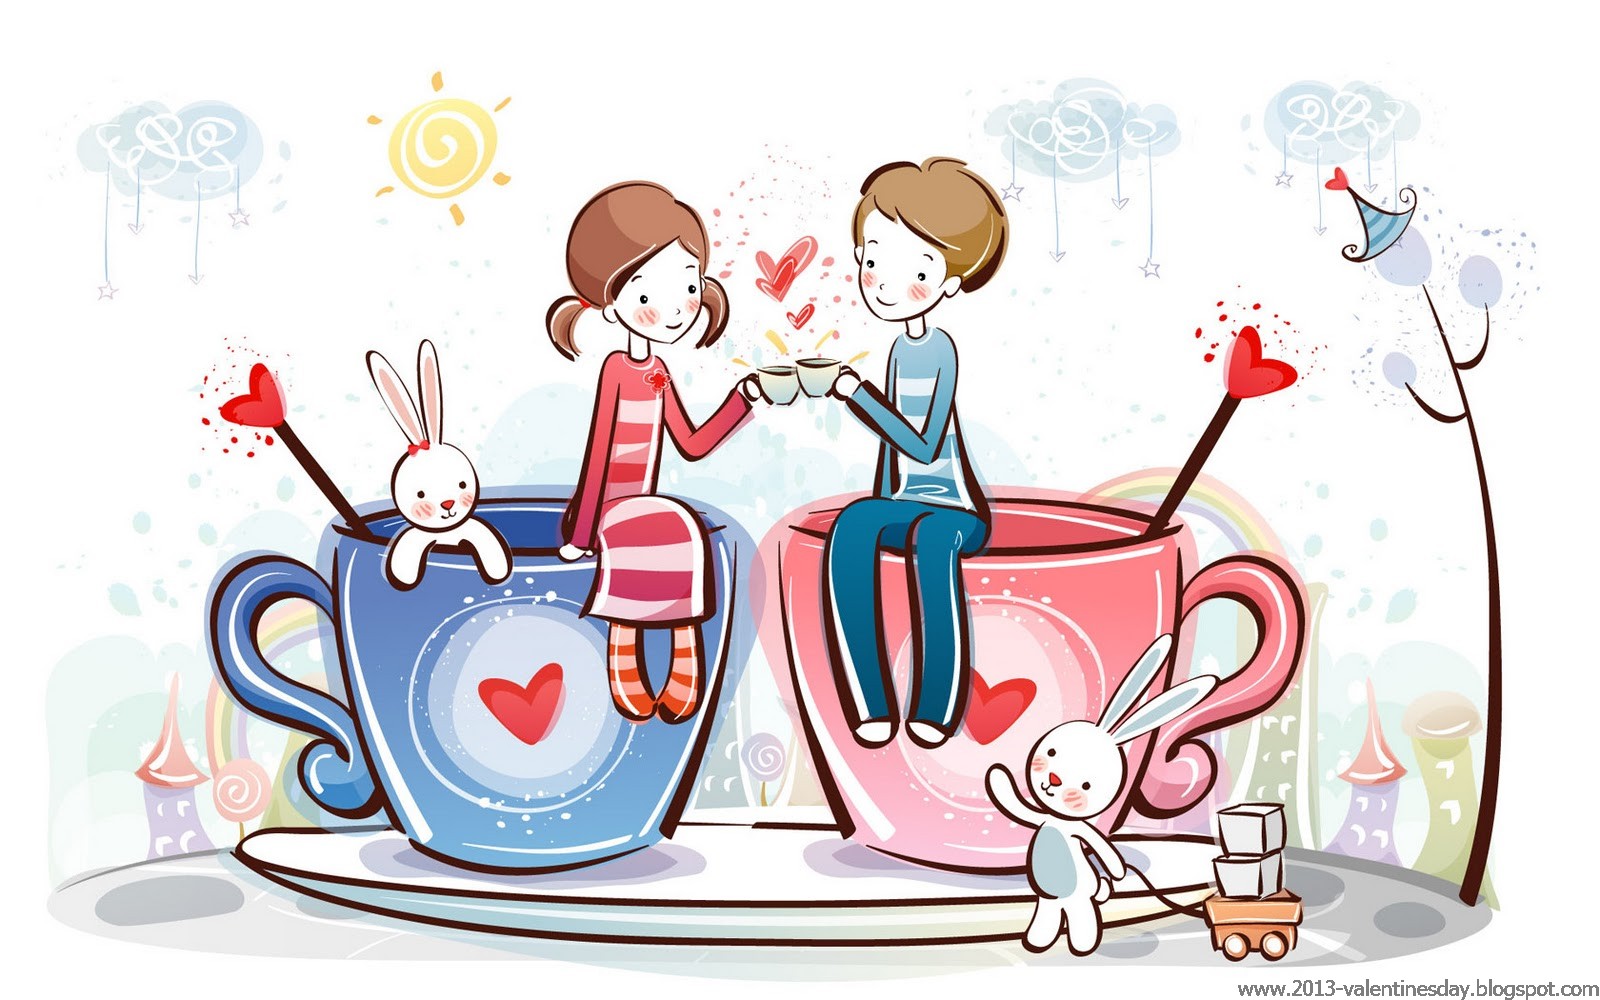 Valentines day Clip Art Collection 2013 | I Love You-Picture And Quotes1600 x 1000